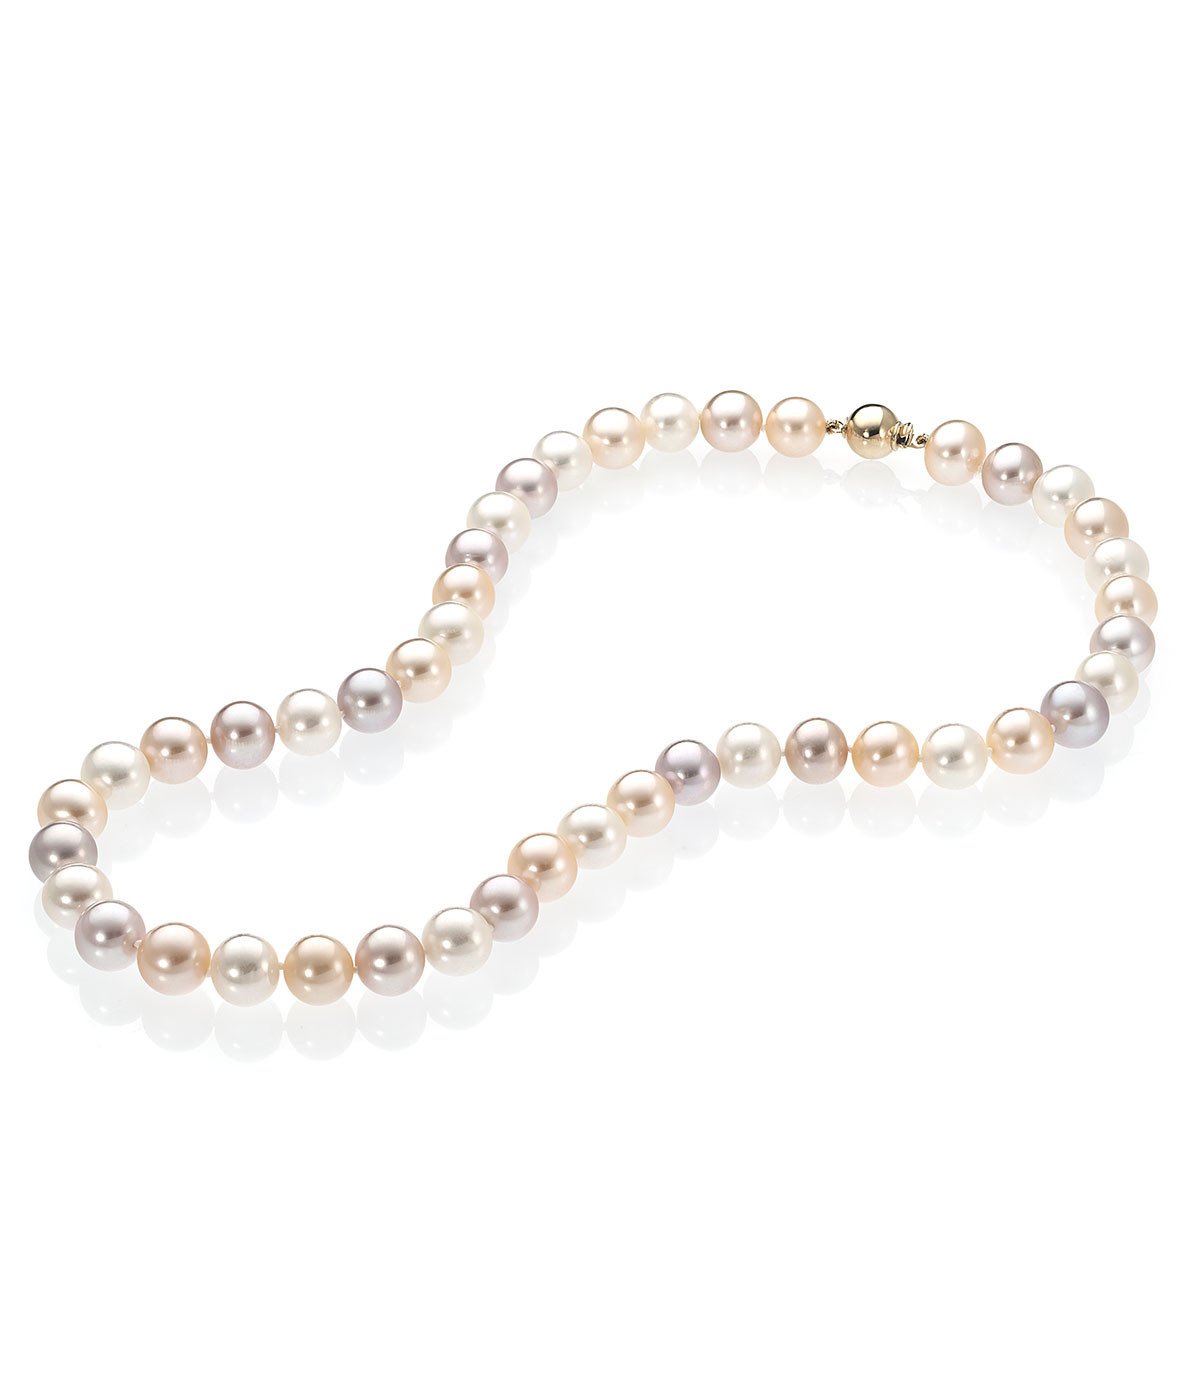 Multicolor Freshwater Pearl Necklace in 18k Yellow Gold